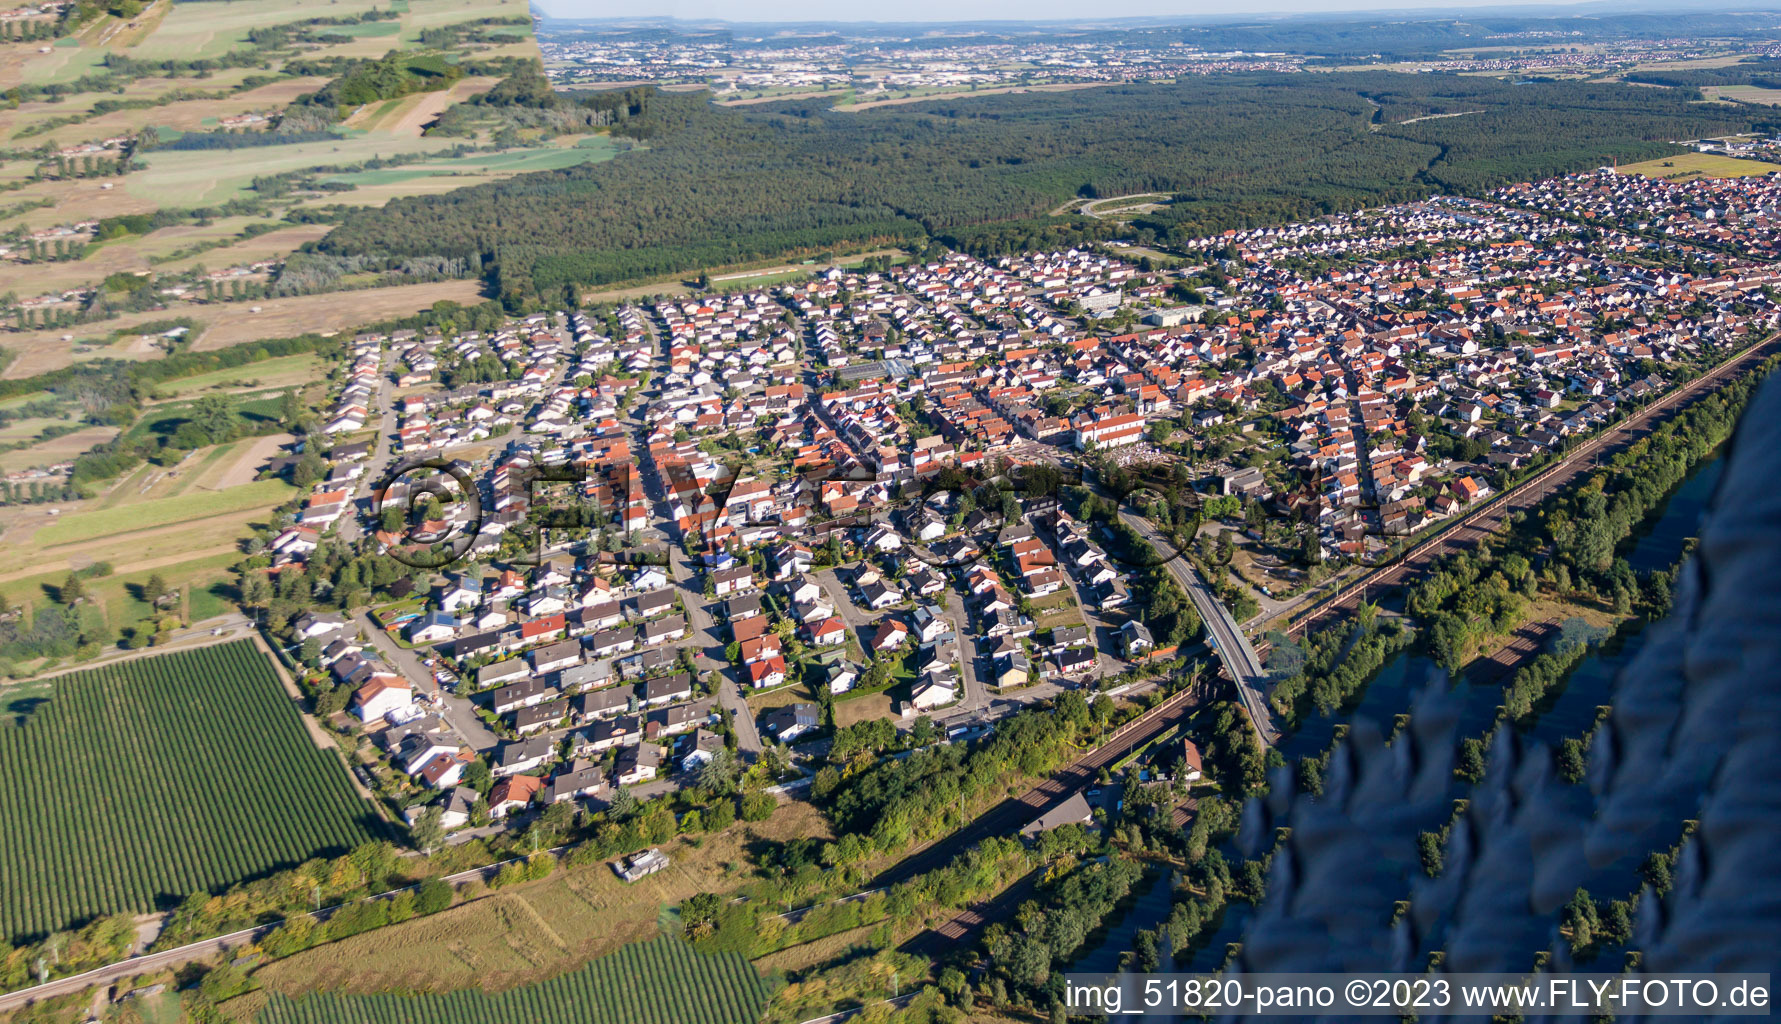 Aerial view of Panorama in the district Neudorf in Graben-Neudorf in the state Baden-Wuerttemberg, Germany